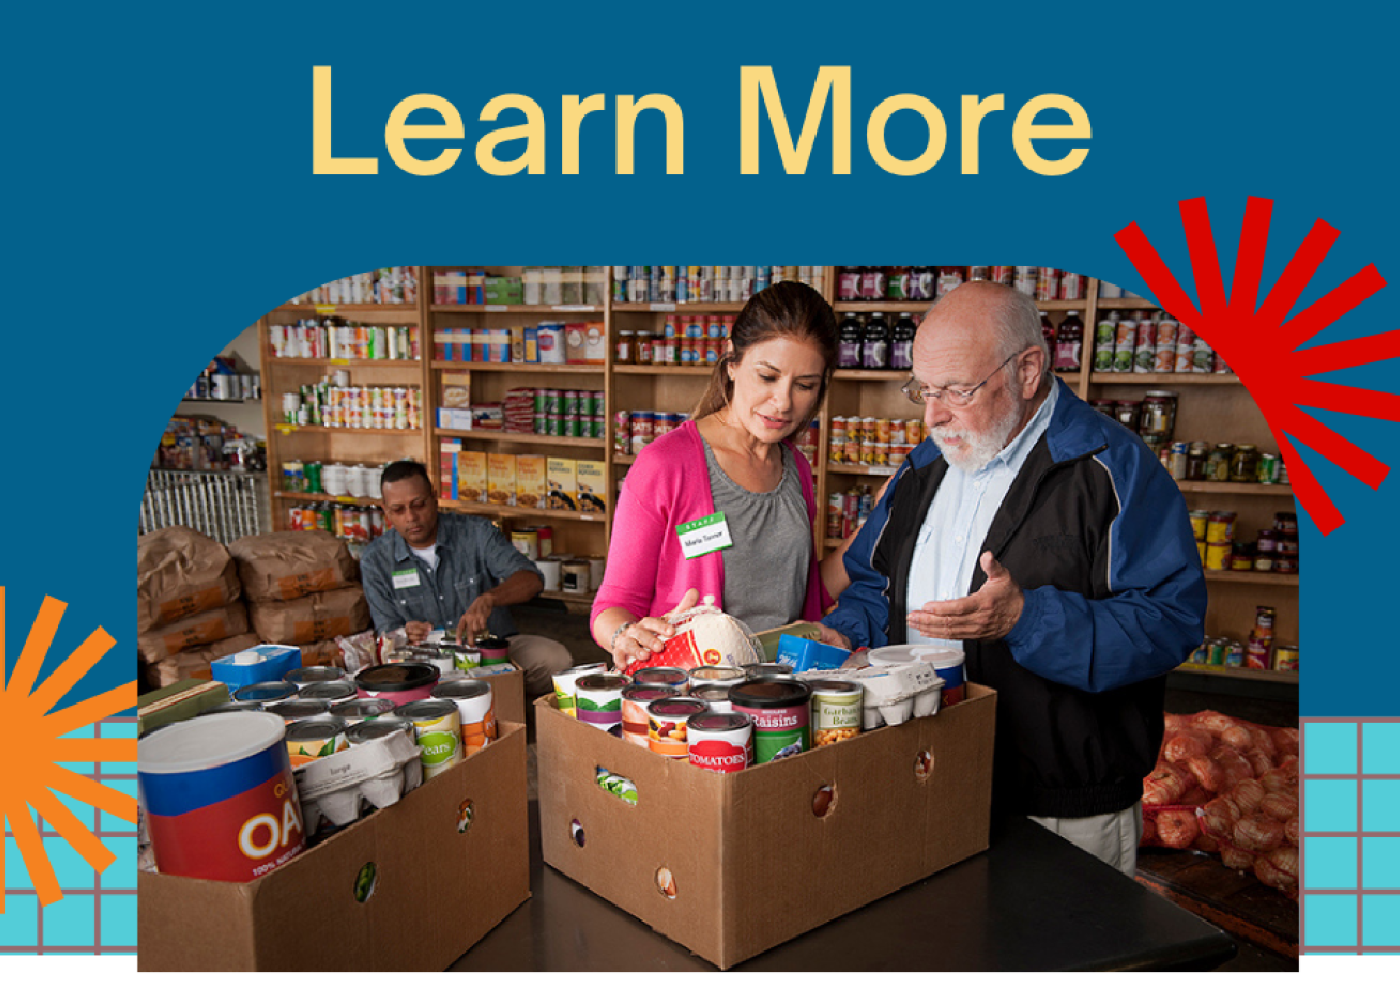 Learn More - with an image of two people in a food pantry looking at the food in boxes